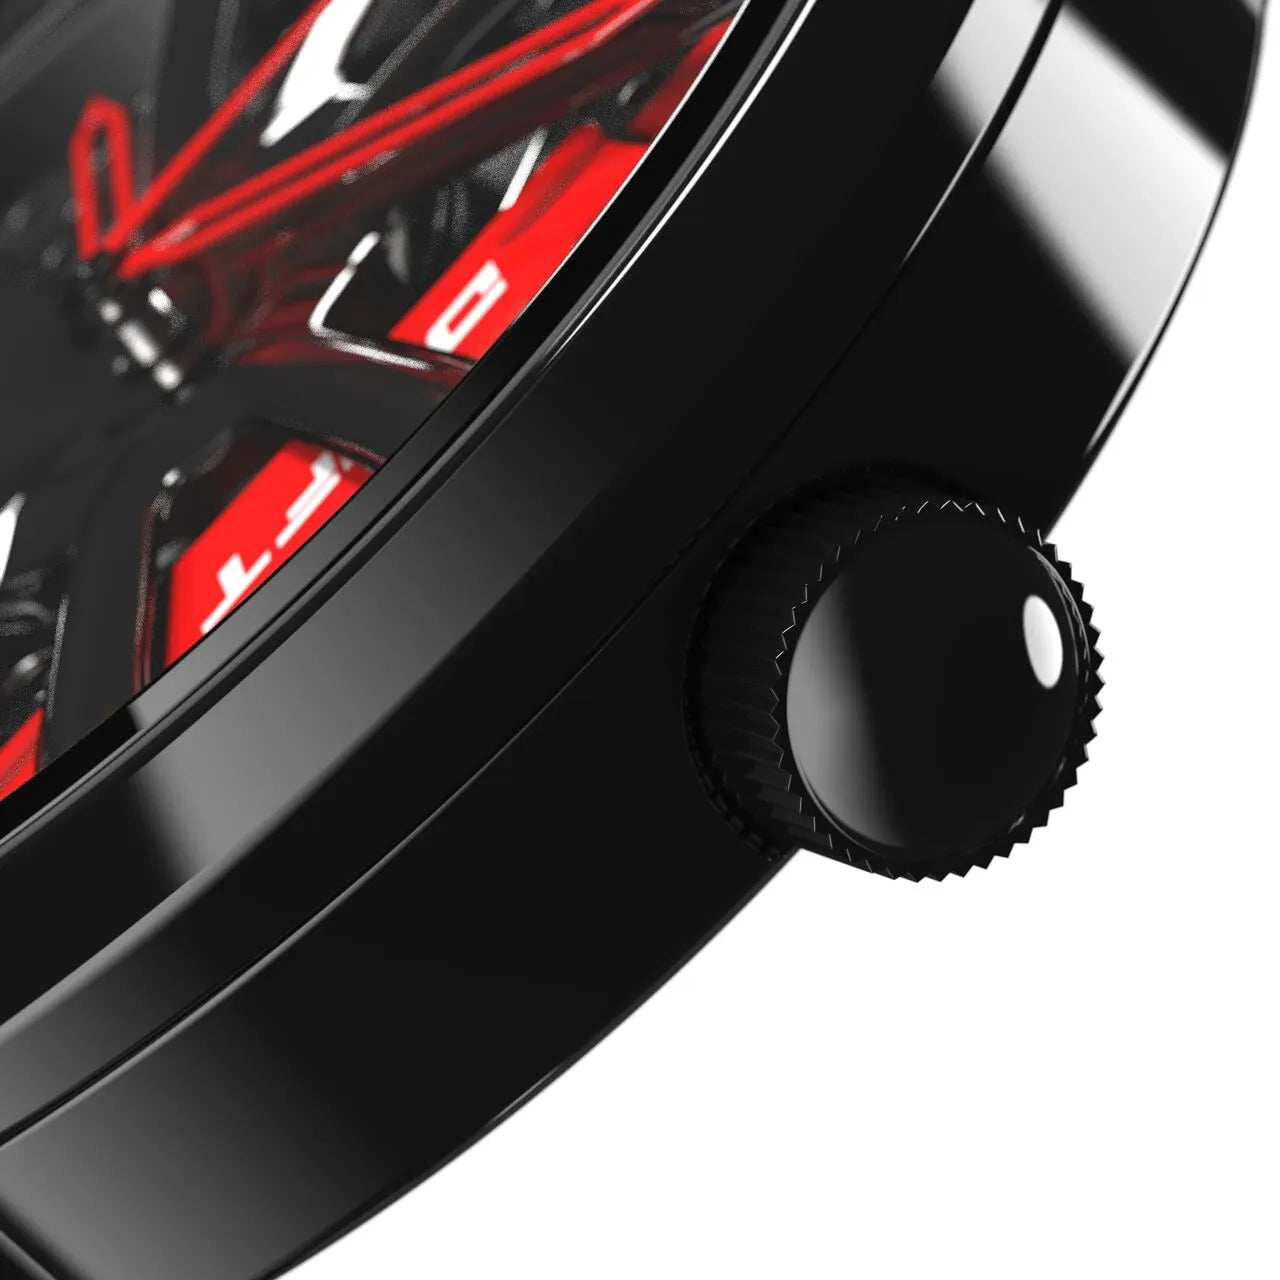 Illuminate your look with our dynamic red Performance GT Rim Watch! Engineered by a German startup, these precision watches are tailored to captivate motorsport, tuning, and auto enthusiasts. Get set to fuel your passion! #id_46744365400394